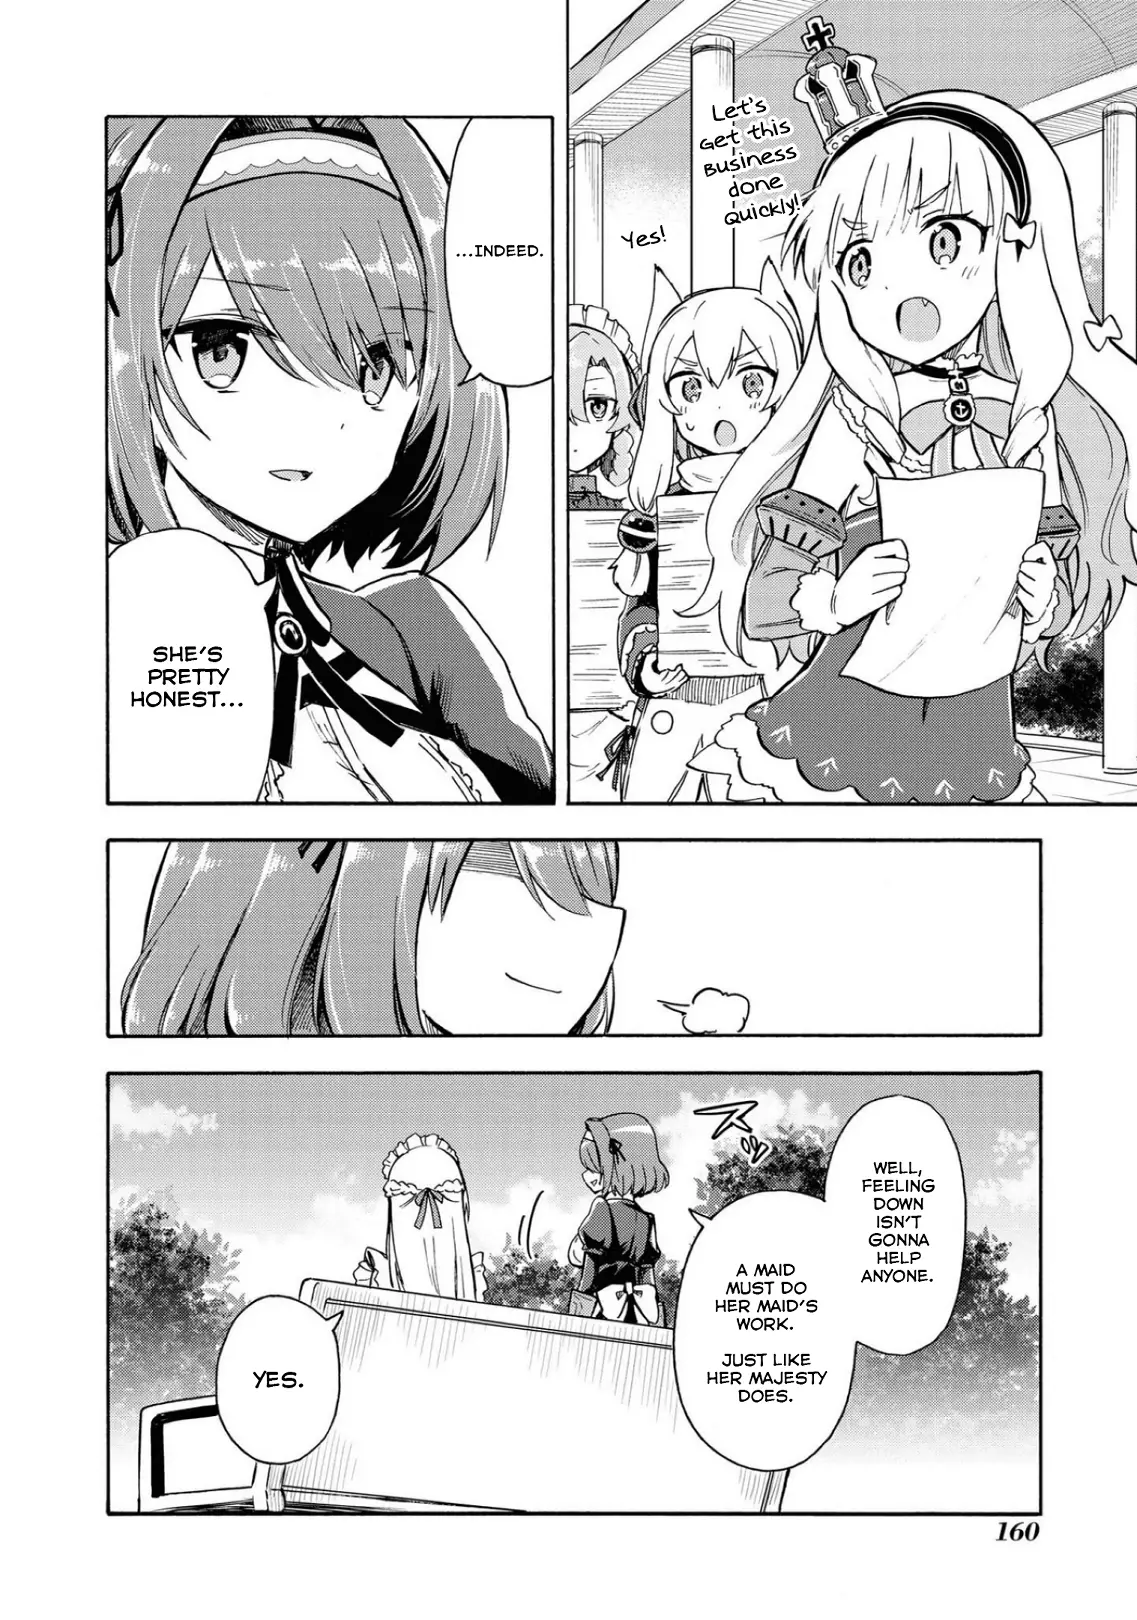 Azur Lane: Queen's Orders - 128.5 page 8-7fb10e0a